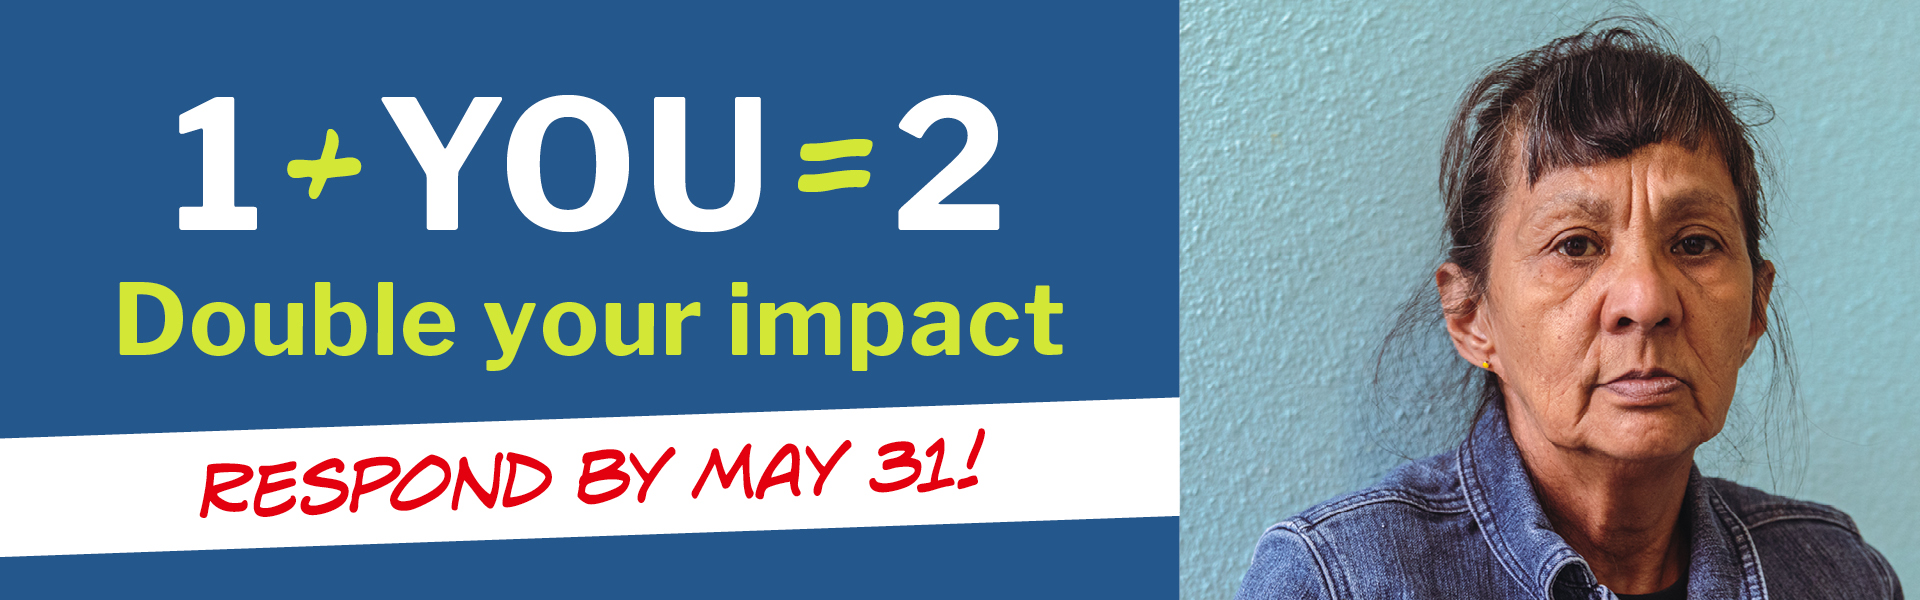 Double Your Impact - May